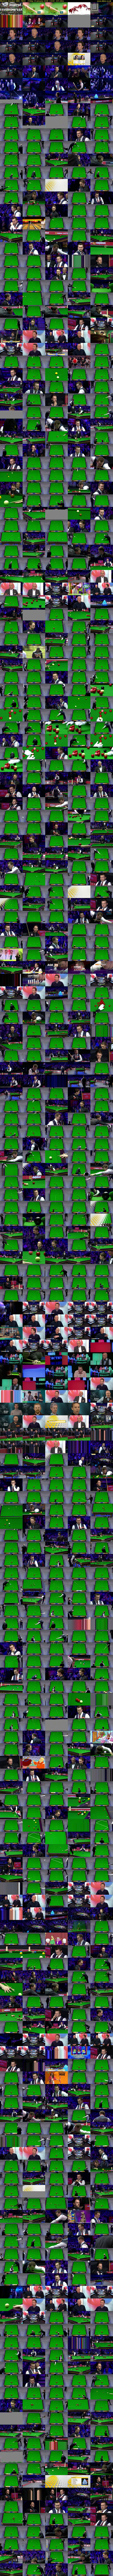 Masters Snooker (BBC TWO) Friday 19 January 2018 13:00 - 16:45